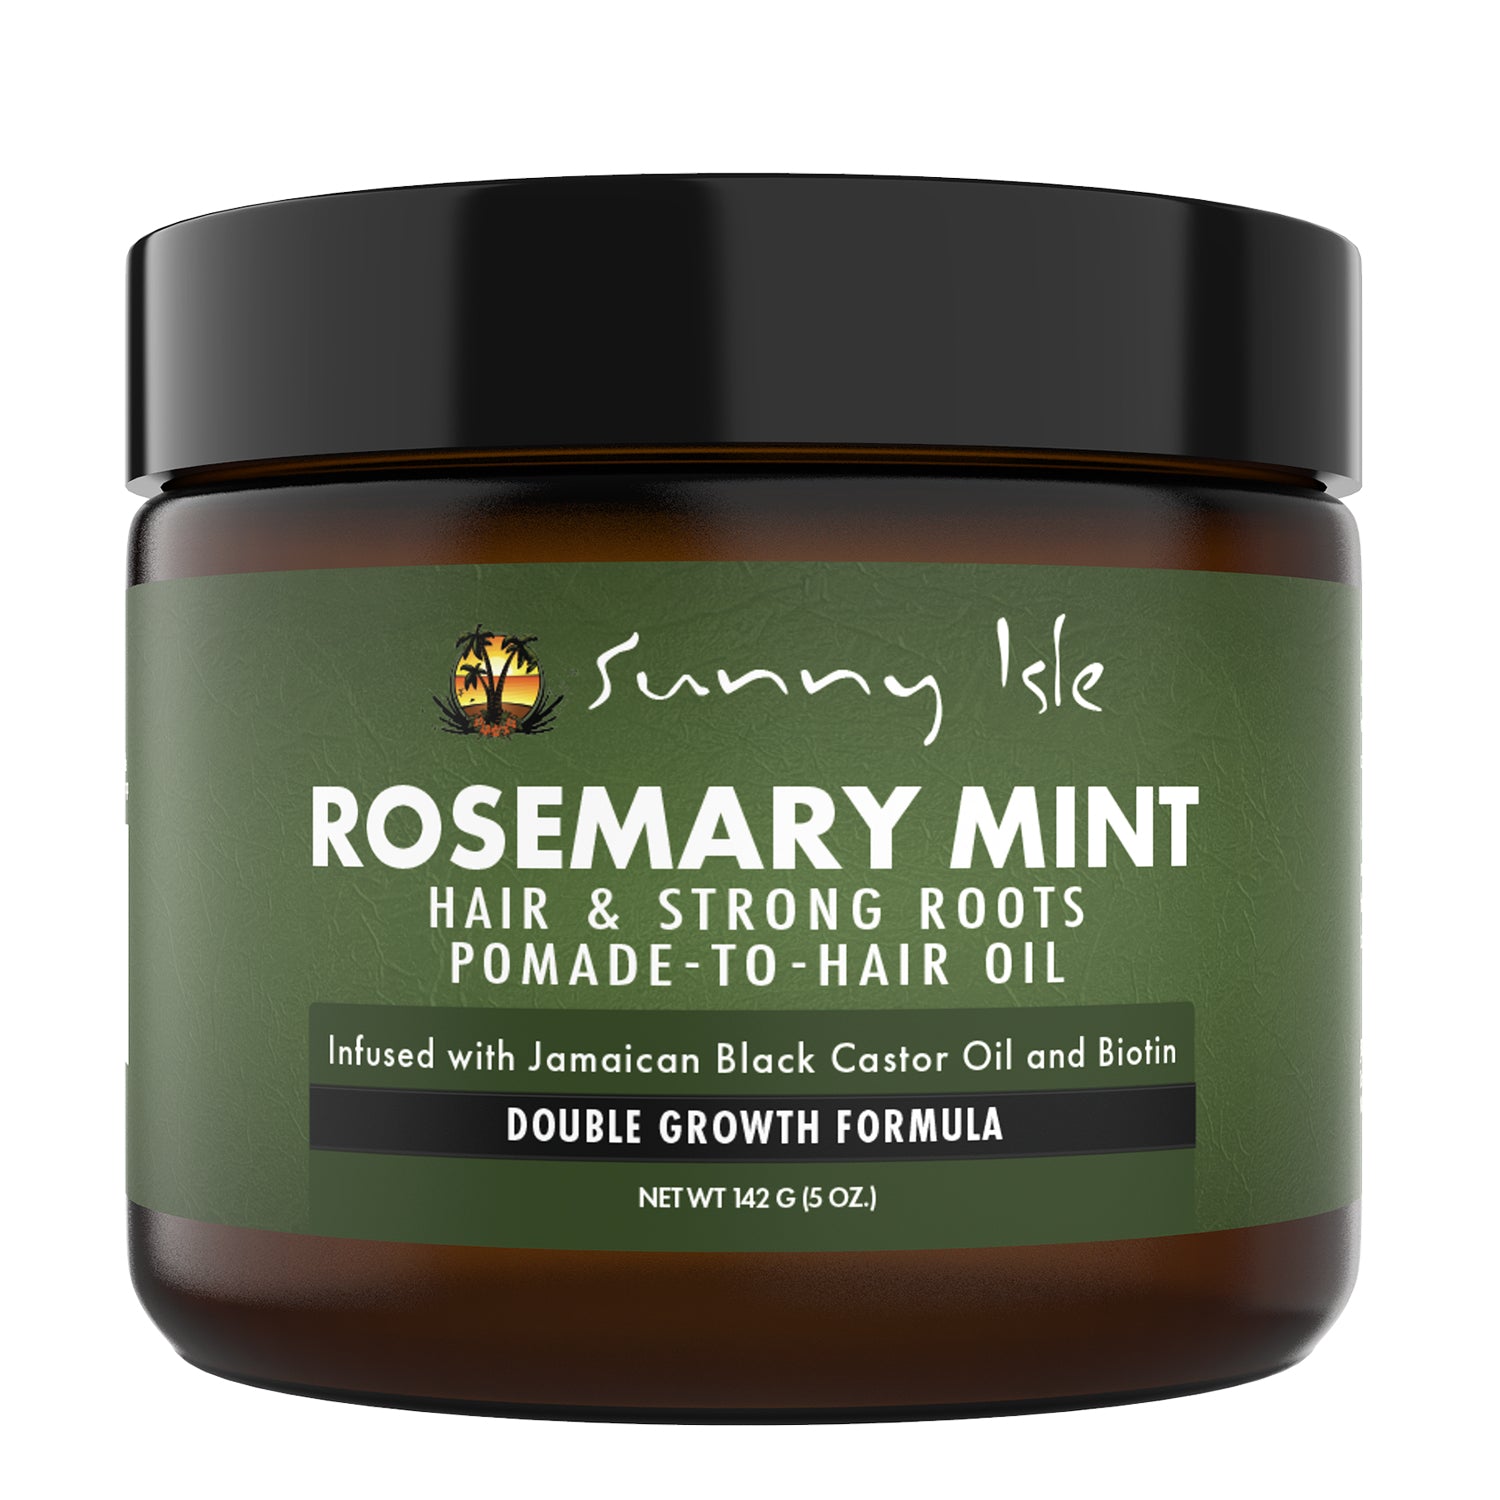 Sunny Isle Rosemary Mint Hair and Strong Roots Oil 3oz